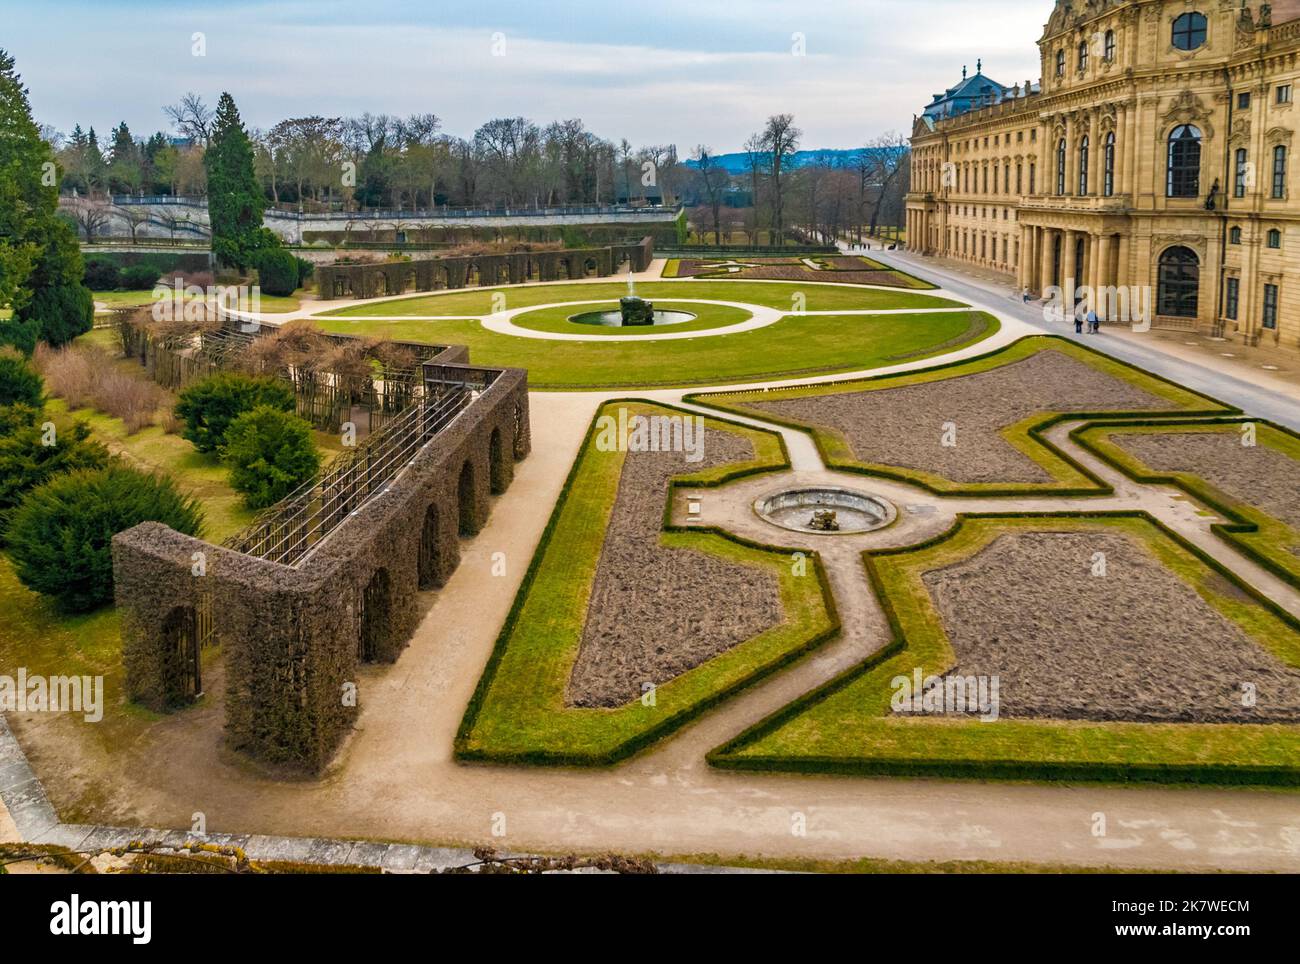 View of the eastern part of the Court Garden of the famous Würzburg Residence, designed in a formal Baroque style. Farther away, the style changes to... Stock Photo